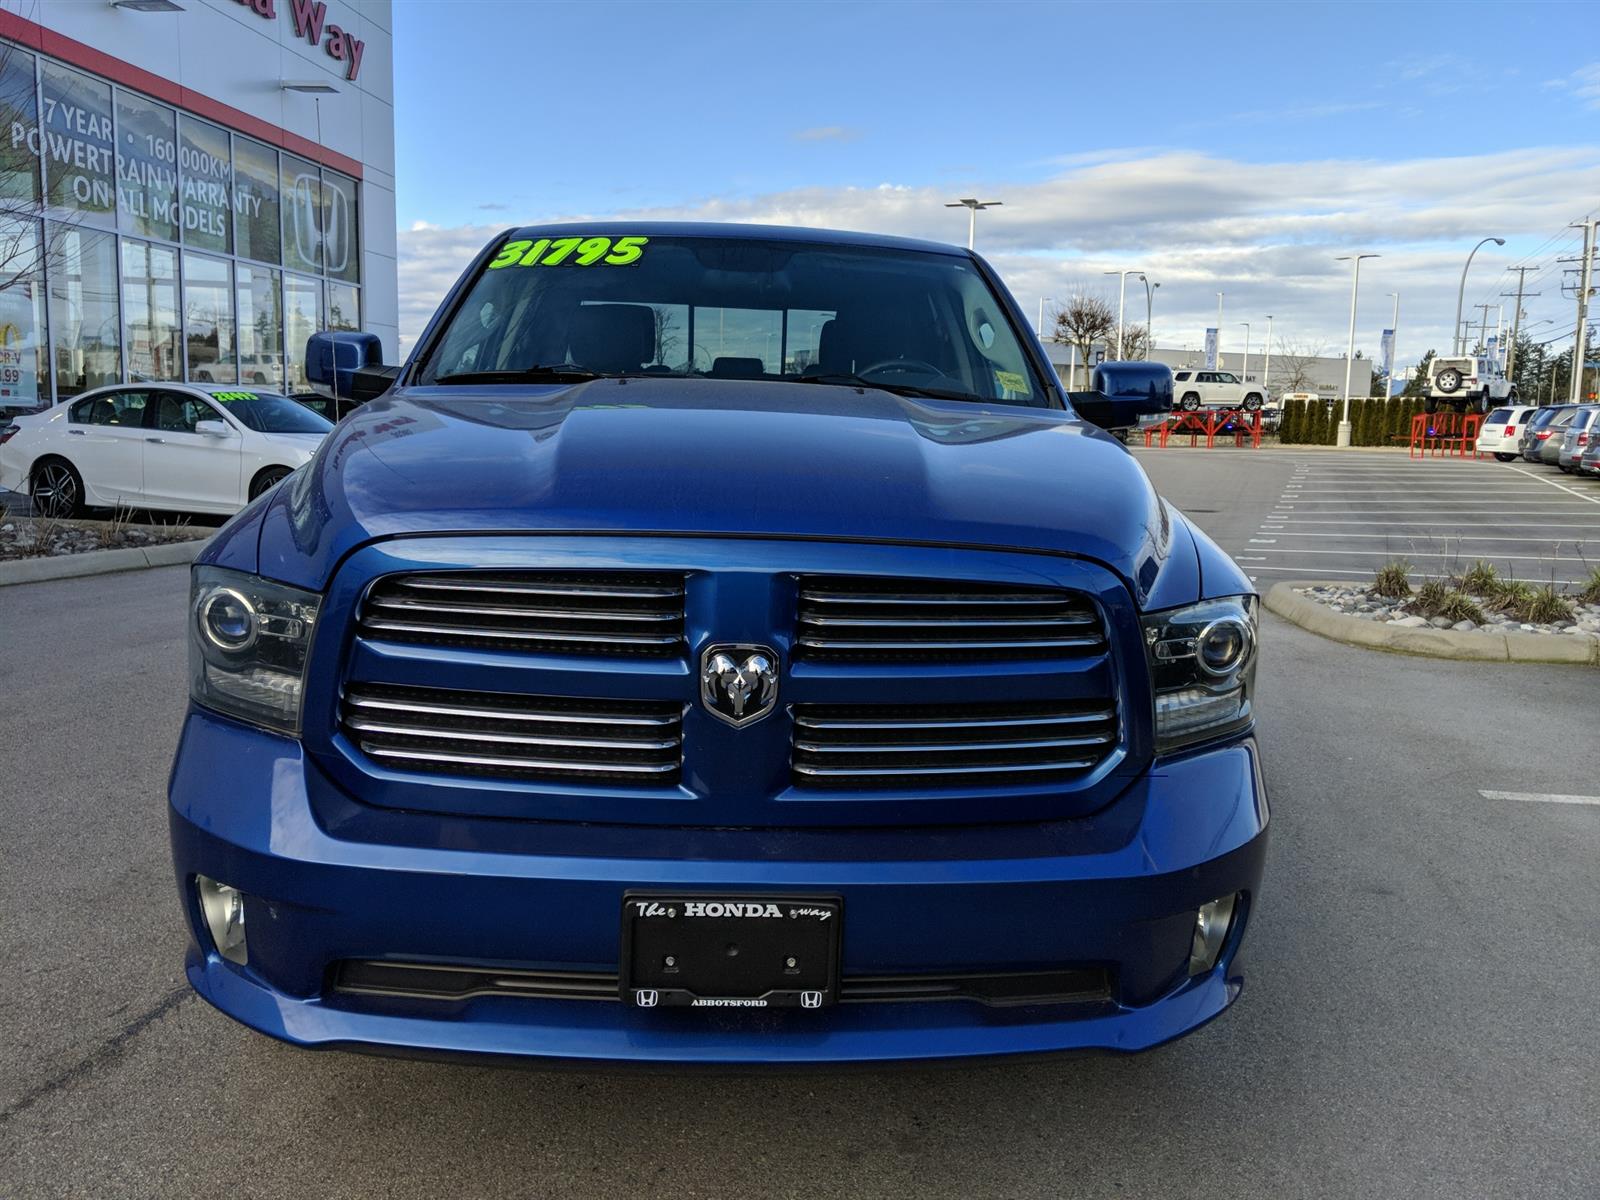 Used 2014 Ram 1500 in Abbotsford,BC